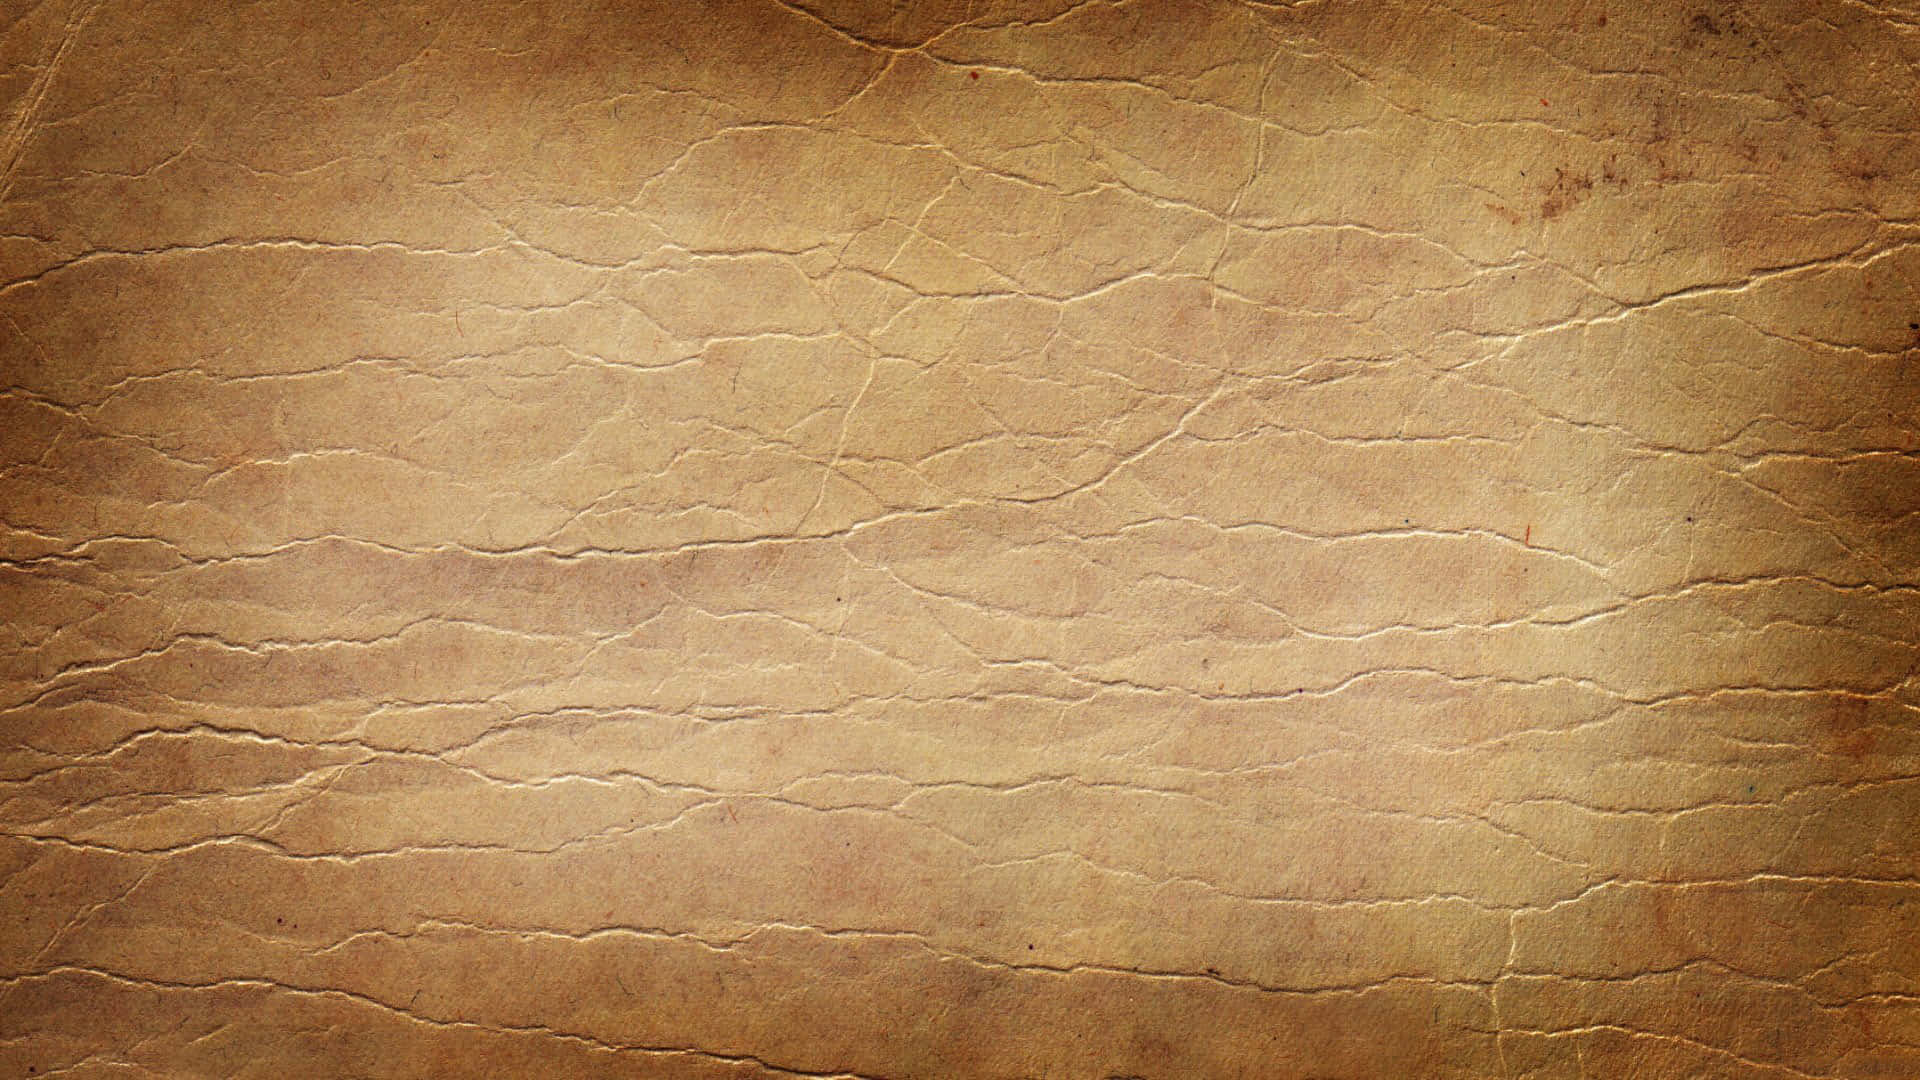 A Brown Leather Surface